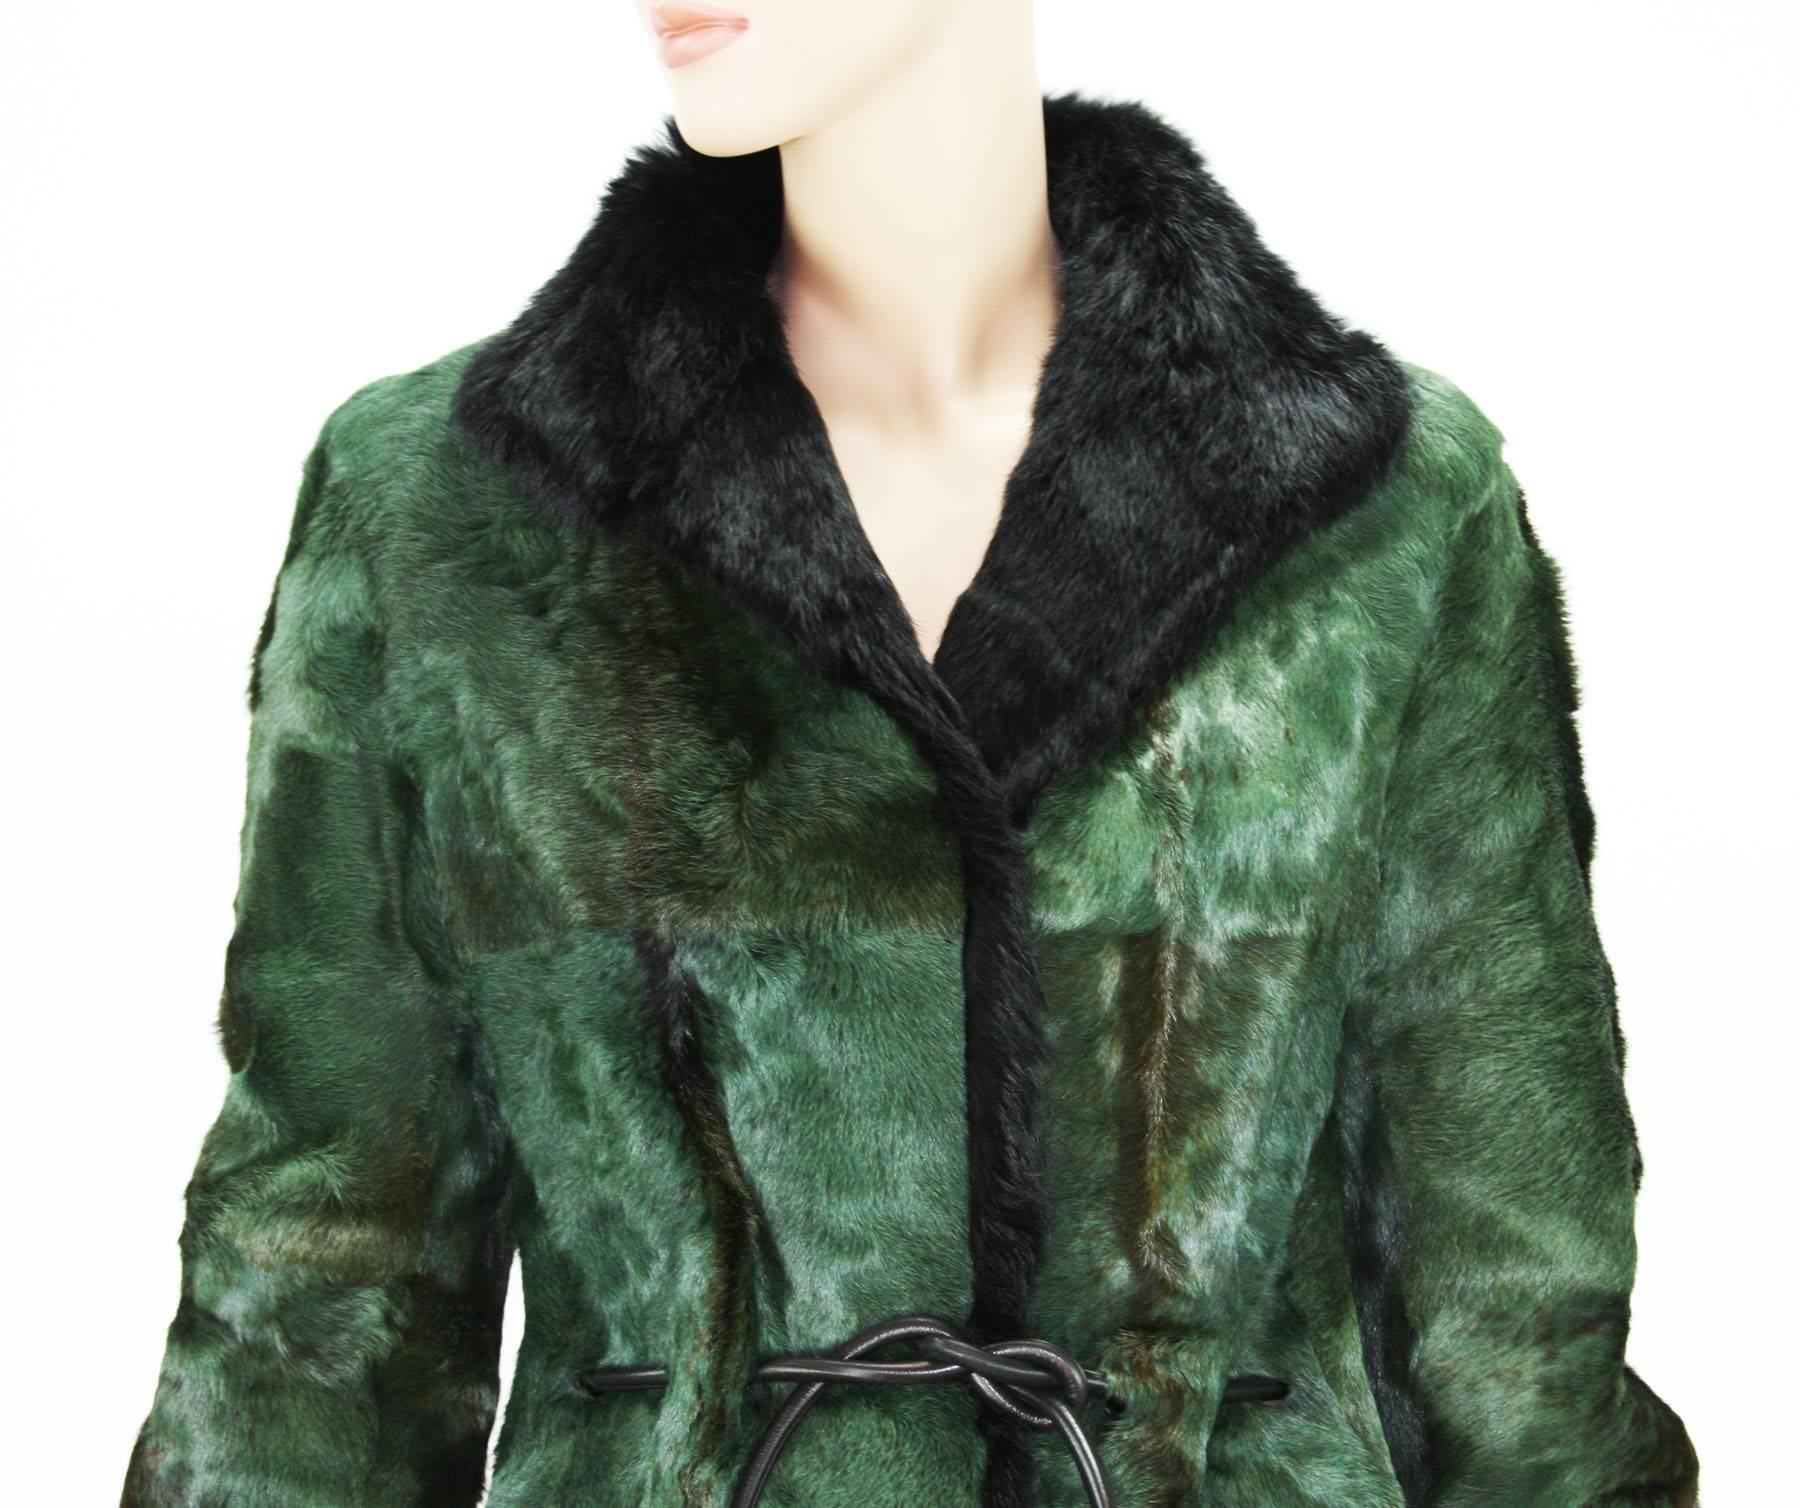 Tom Ford for Gucci 1999 Collection Reversible Emerald Green Fur Coat It. 40 For Sale 3